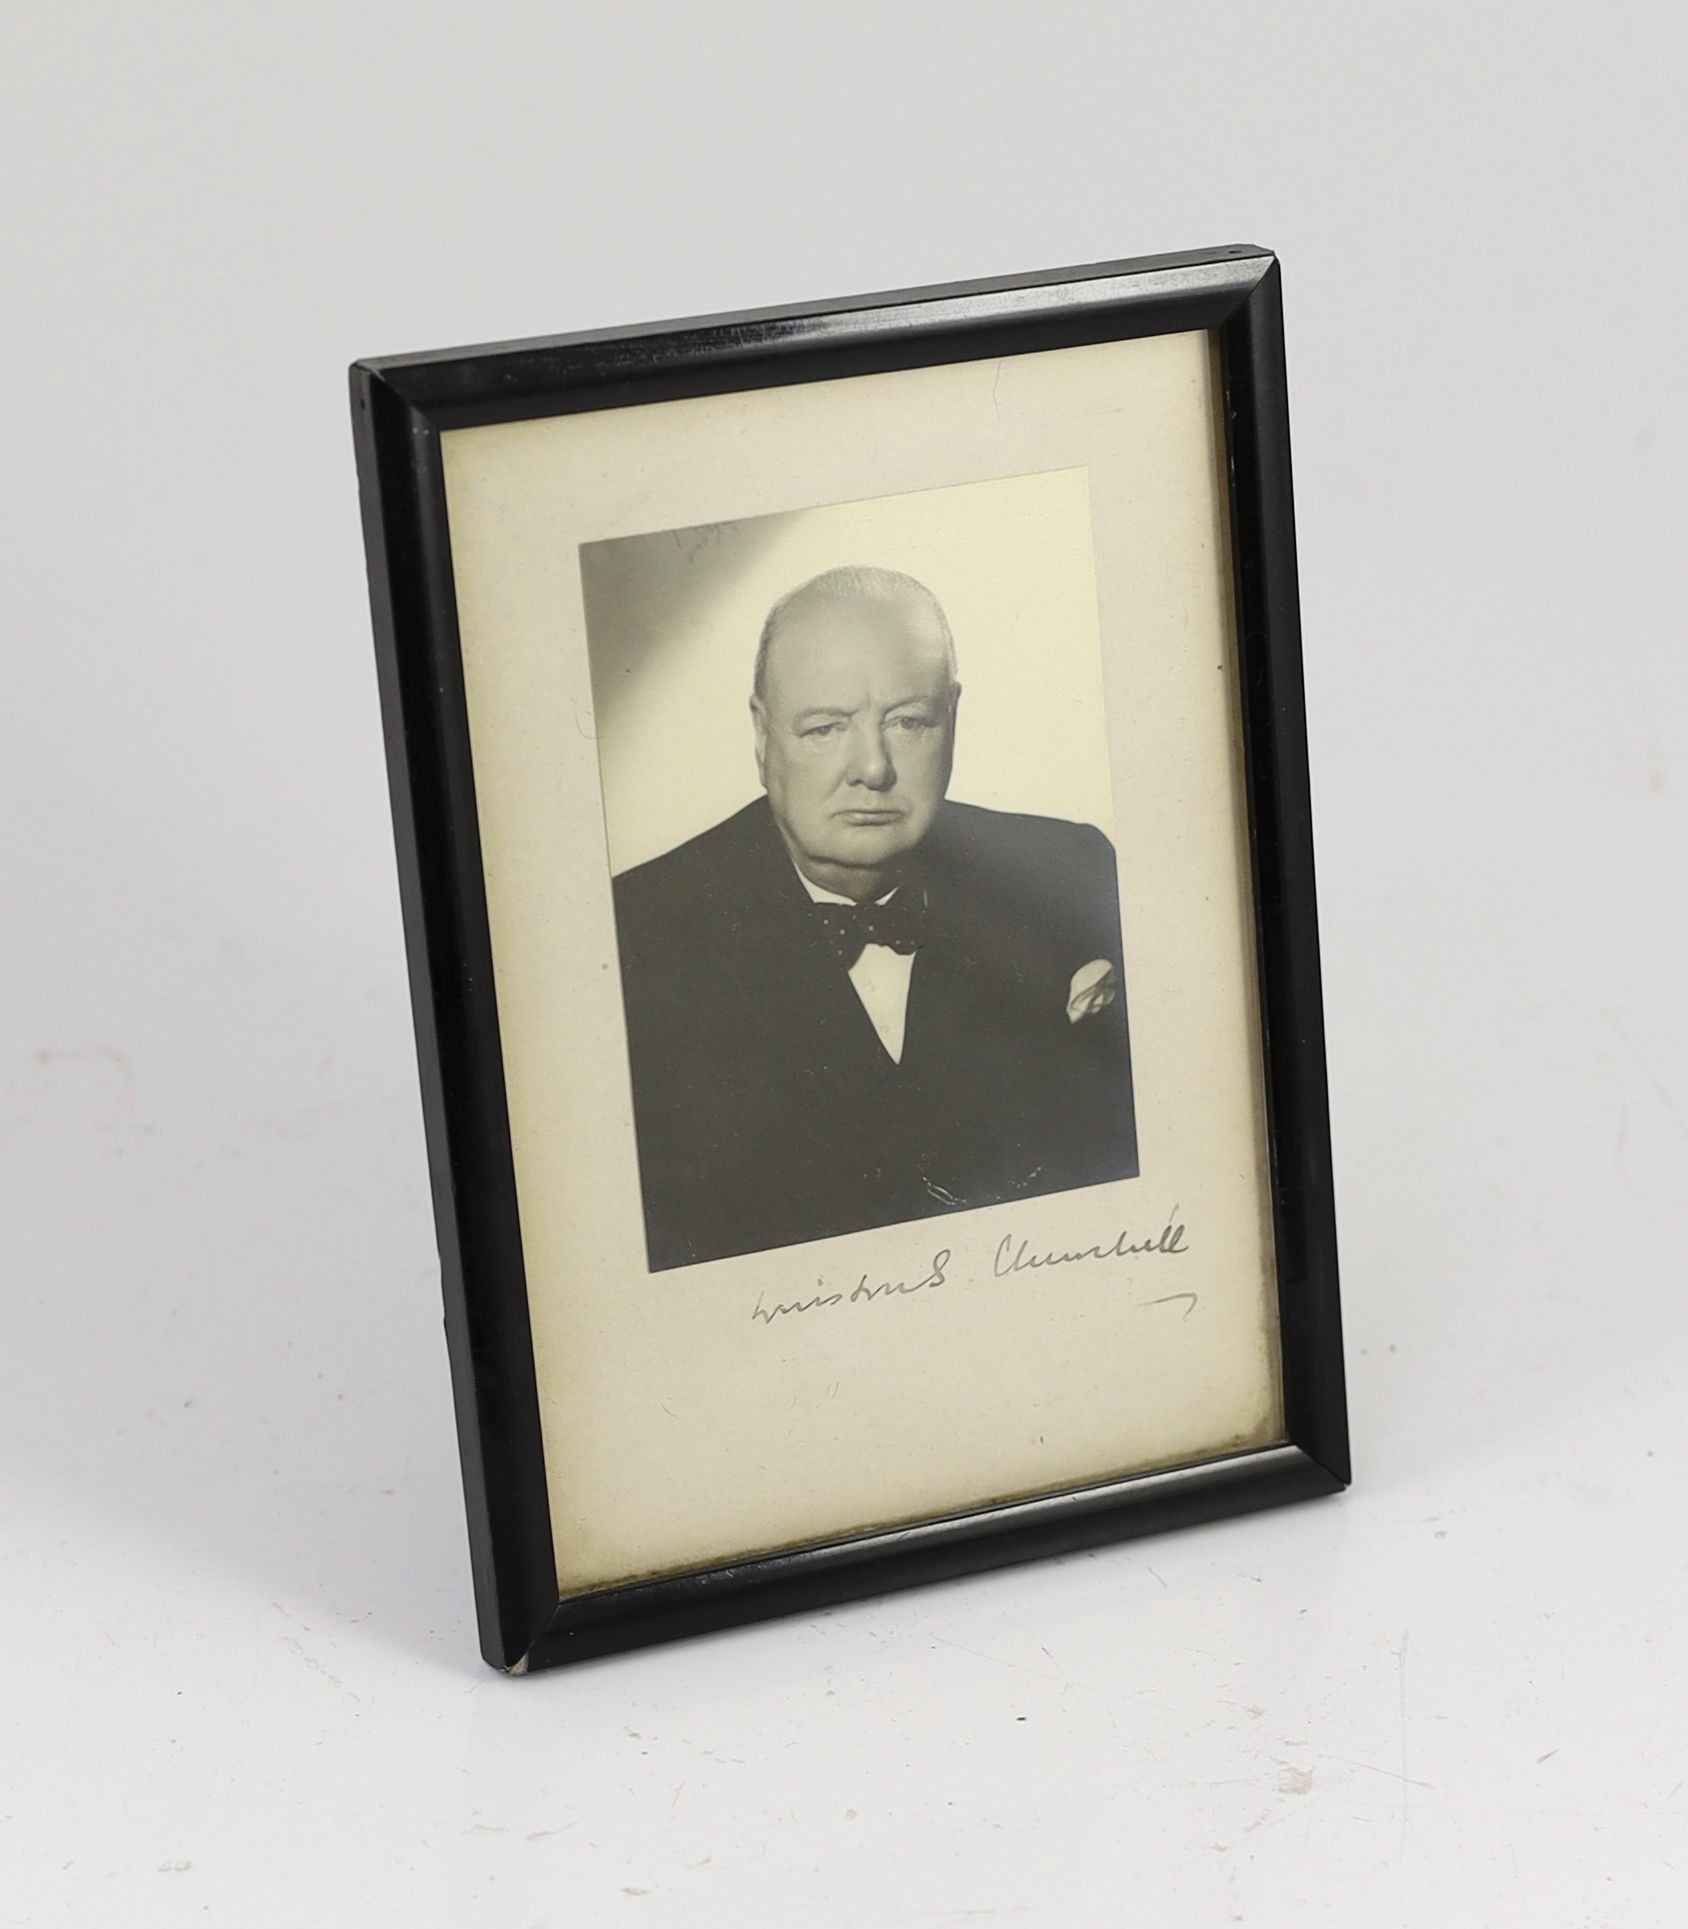 A signed black and white photograph of Winston Churchill by Vivienne, overall 19 x 14cm